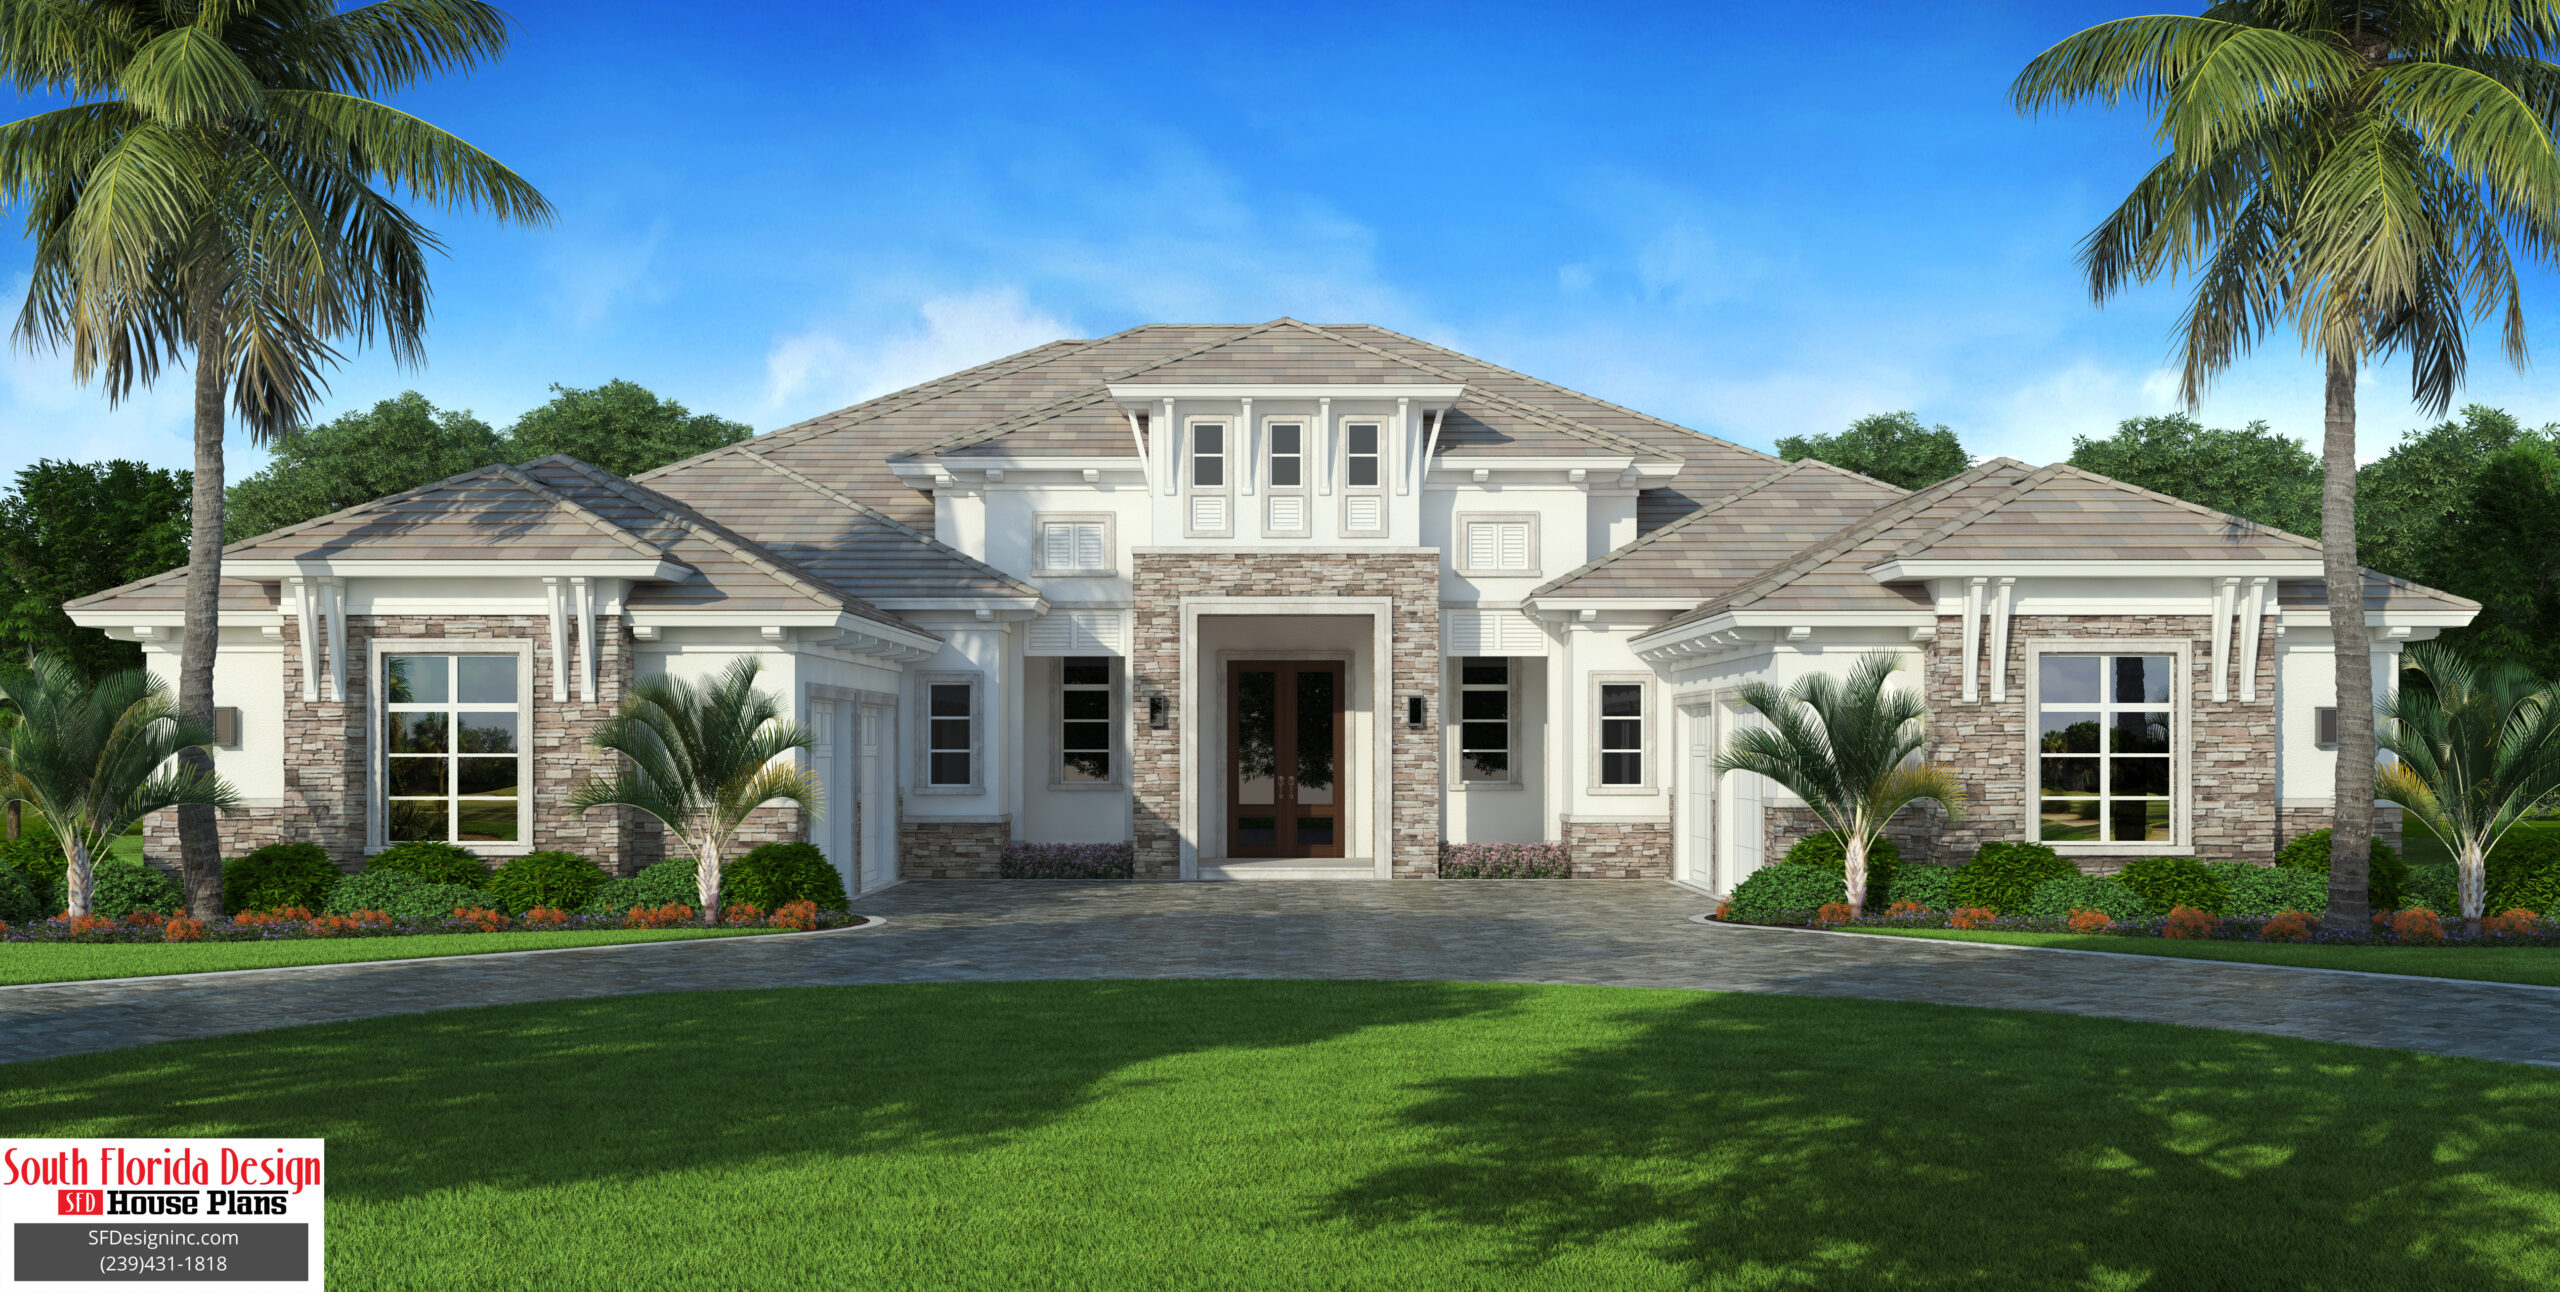 Color front elevation rending of a 1-story 5289sf house plan